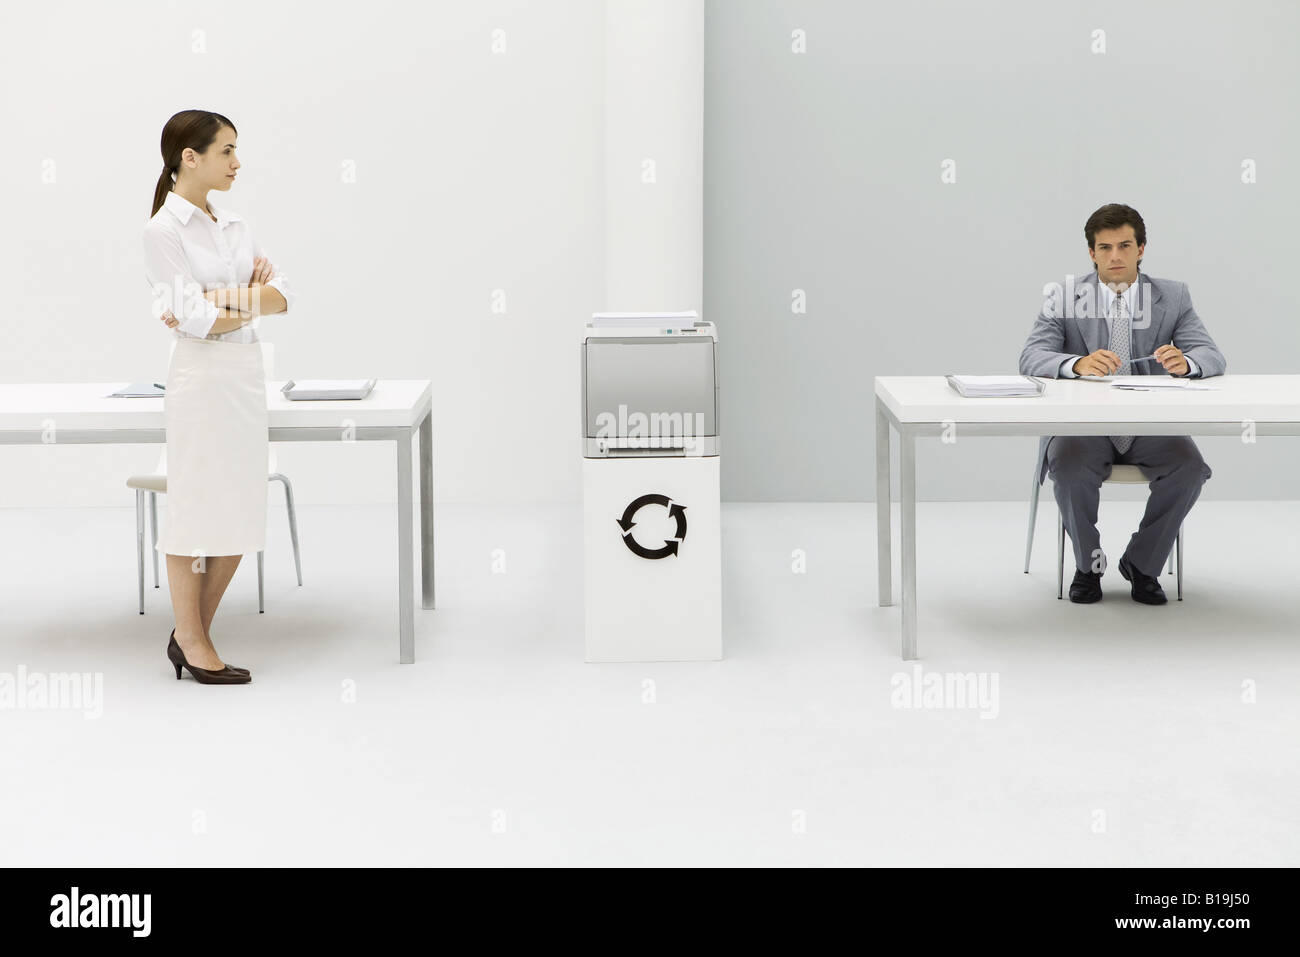 Two professionals in office, woman with arms folded, man looking at camera, circular arrow symbol between them Stock Photo